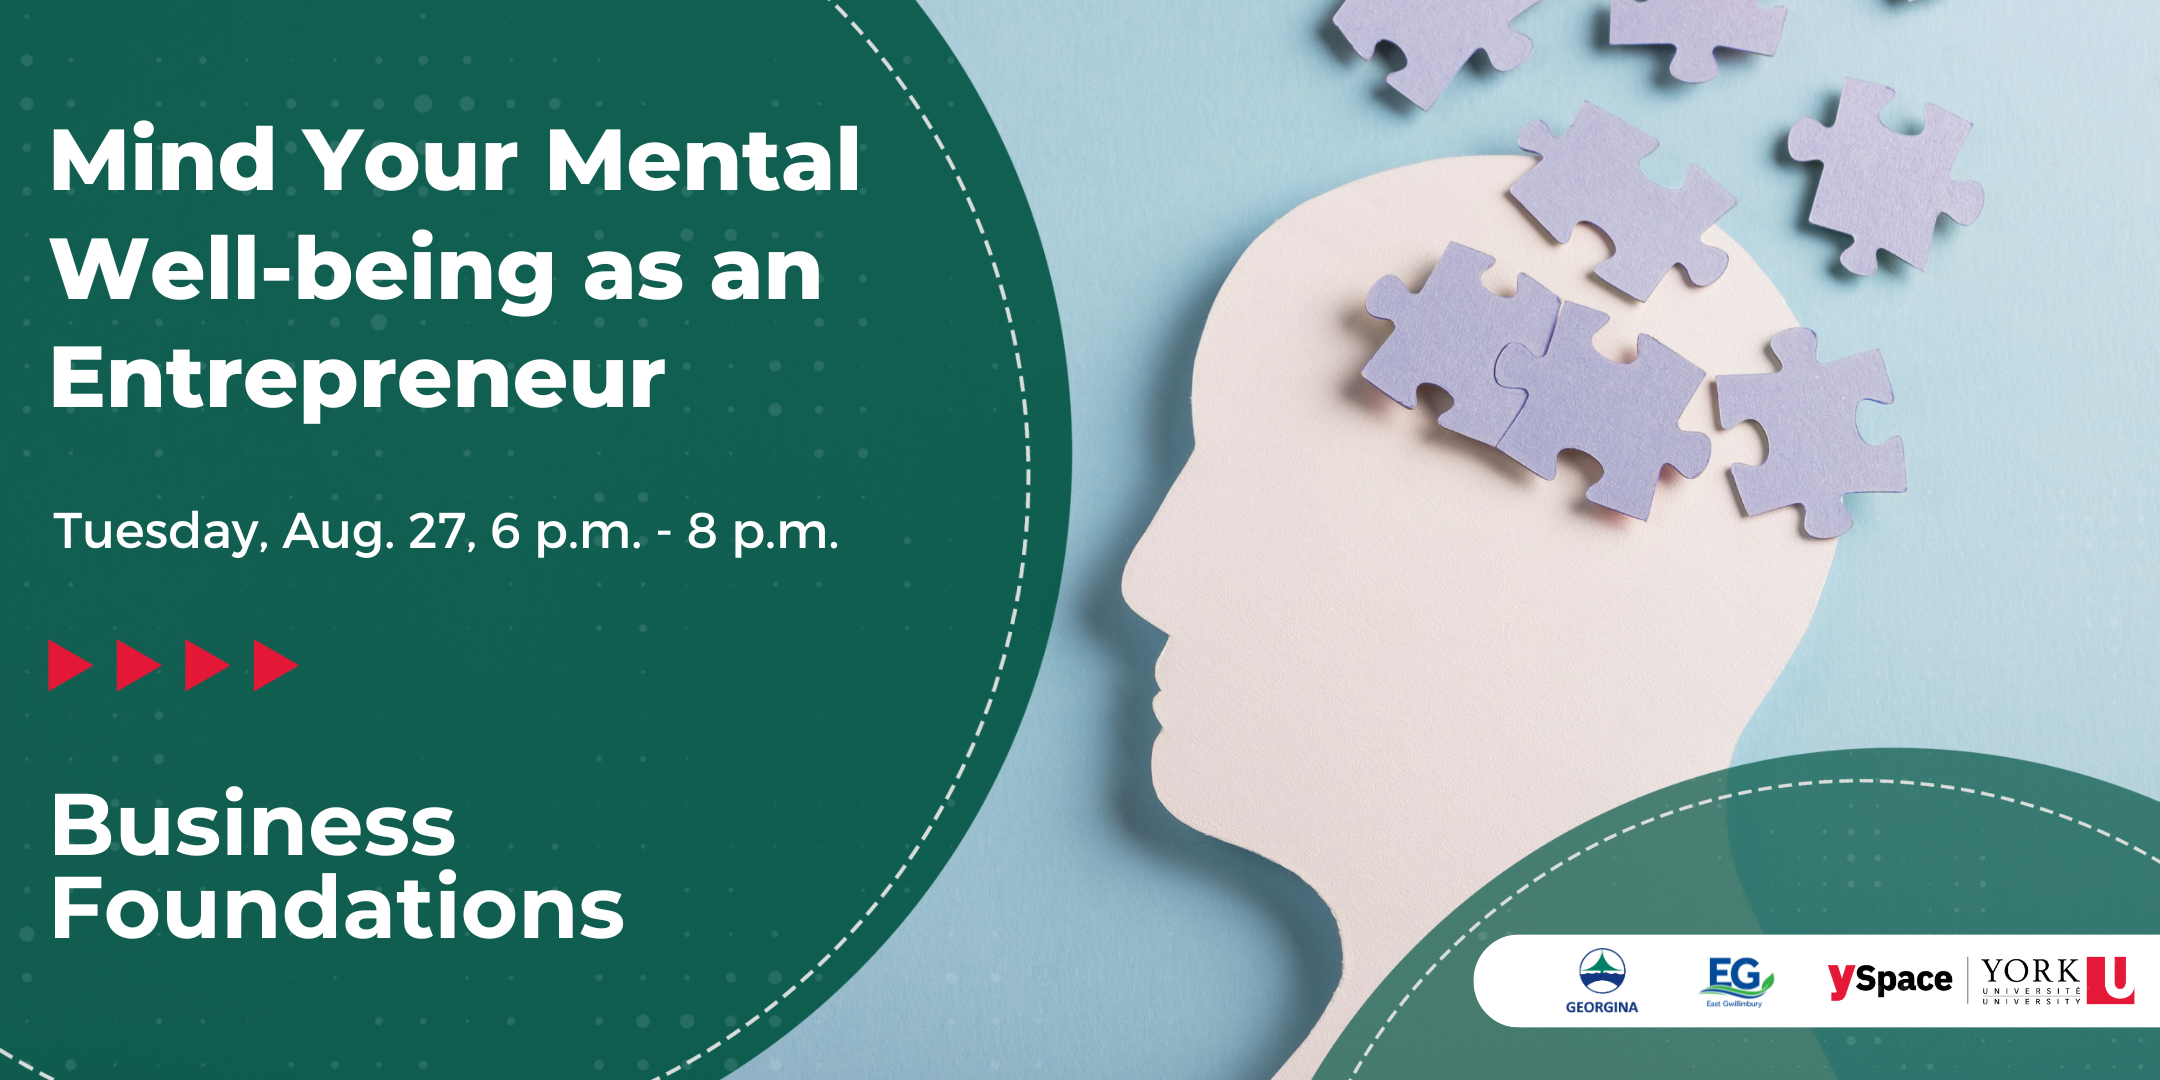 head shape with puzzle pieces with the words Mind your Mental Well-being as an Entrepreneur Tuesday Aug. 27 6 p.m. - 8 p.m. Business Foundations